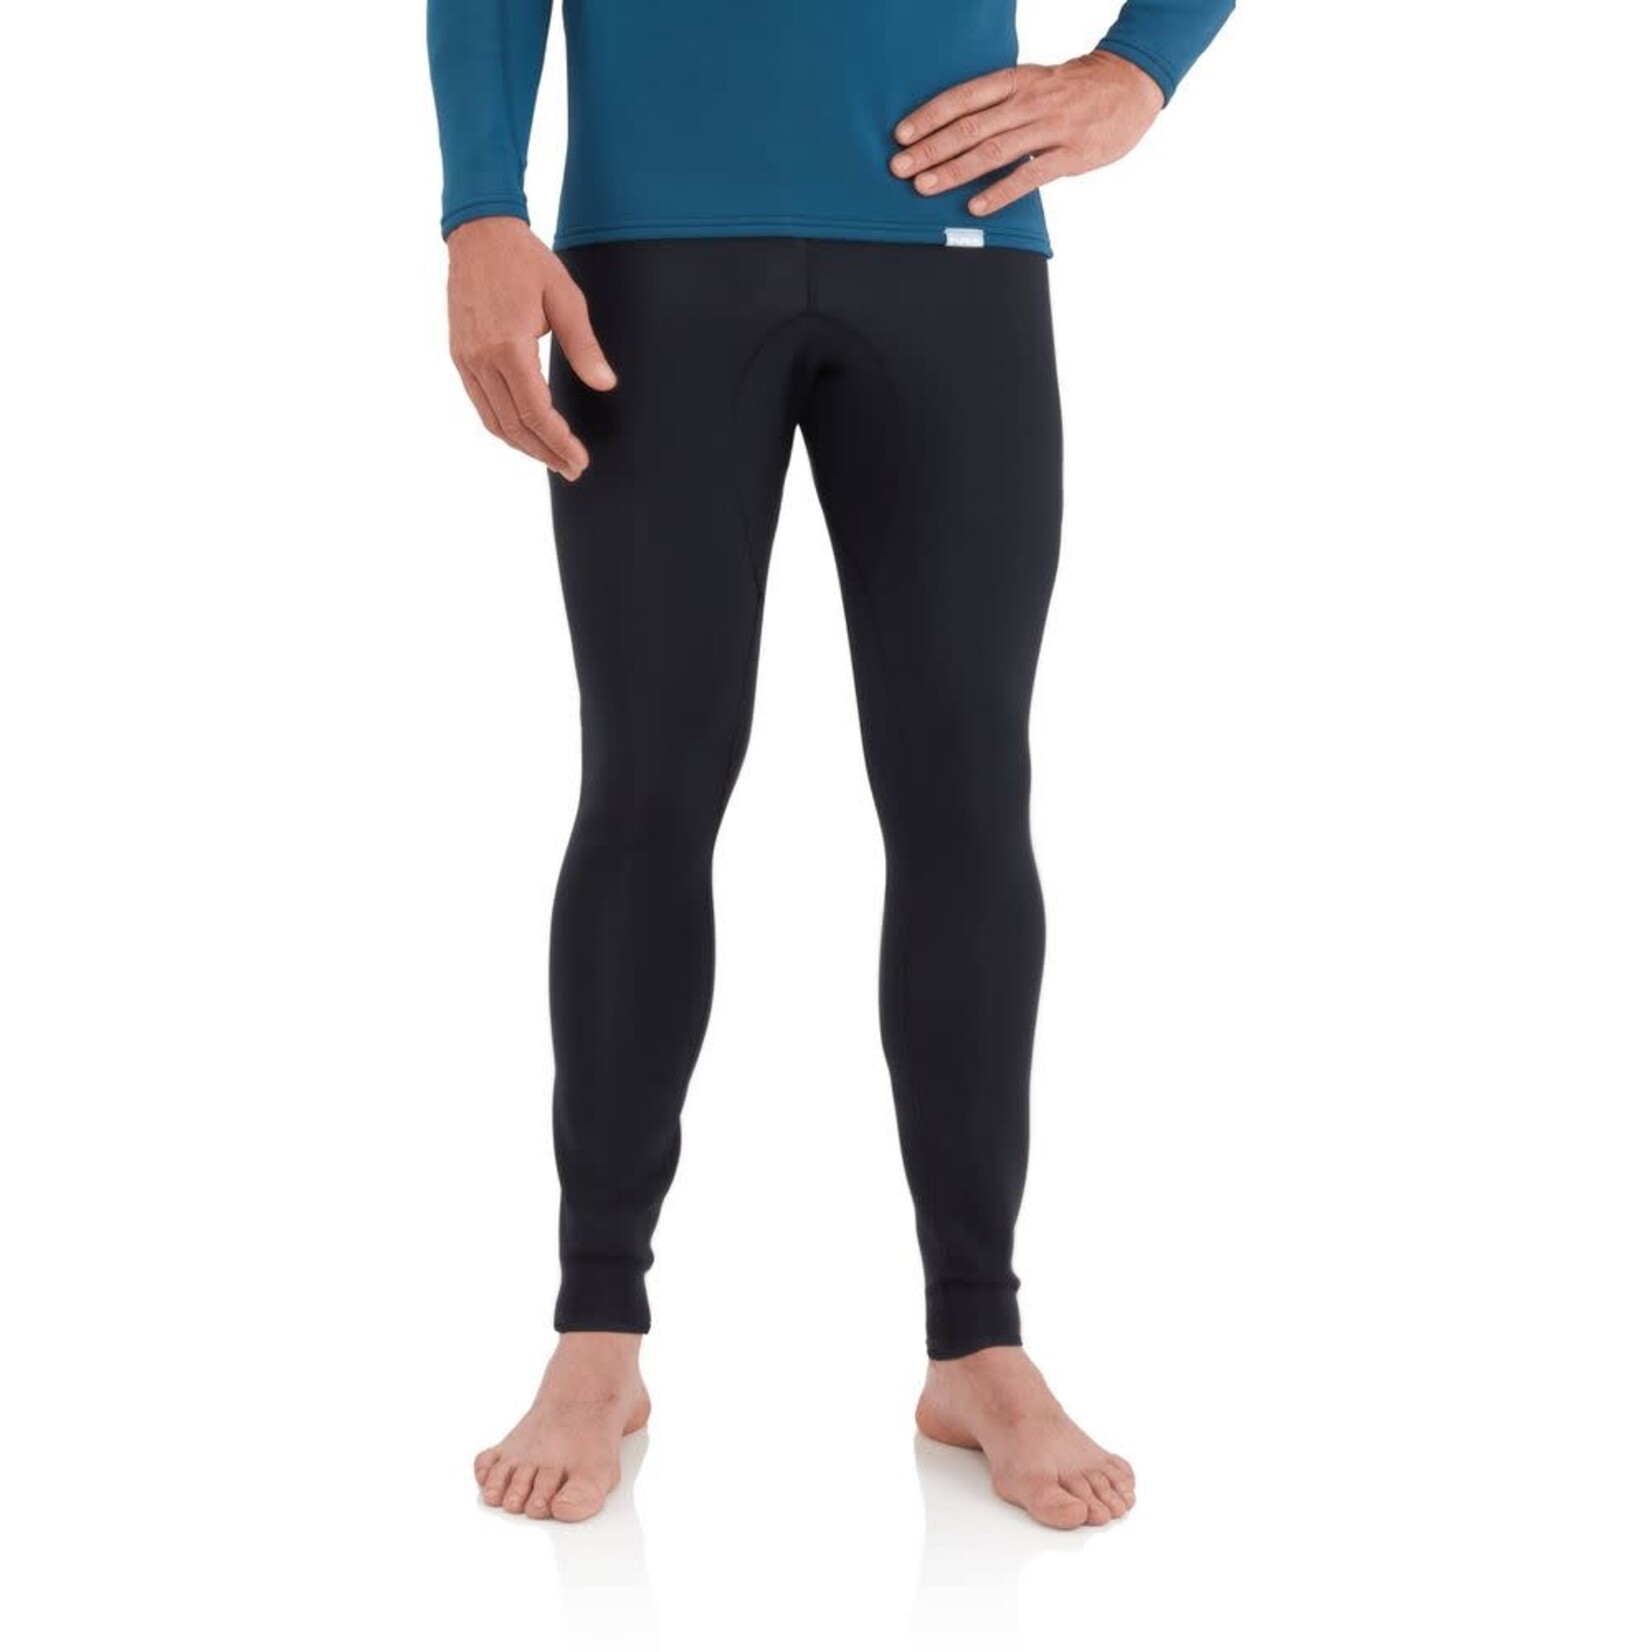 NRS Pantalons isothermiques Hydroskin 0.5 pour hommes